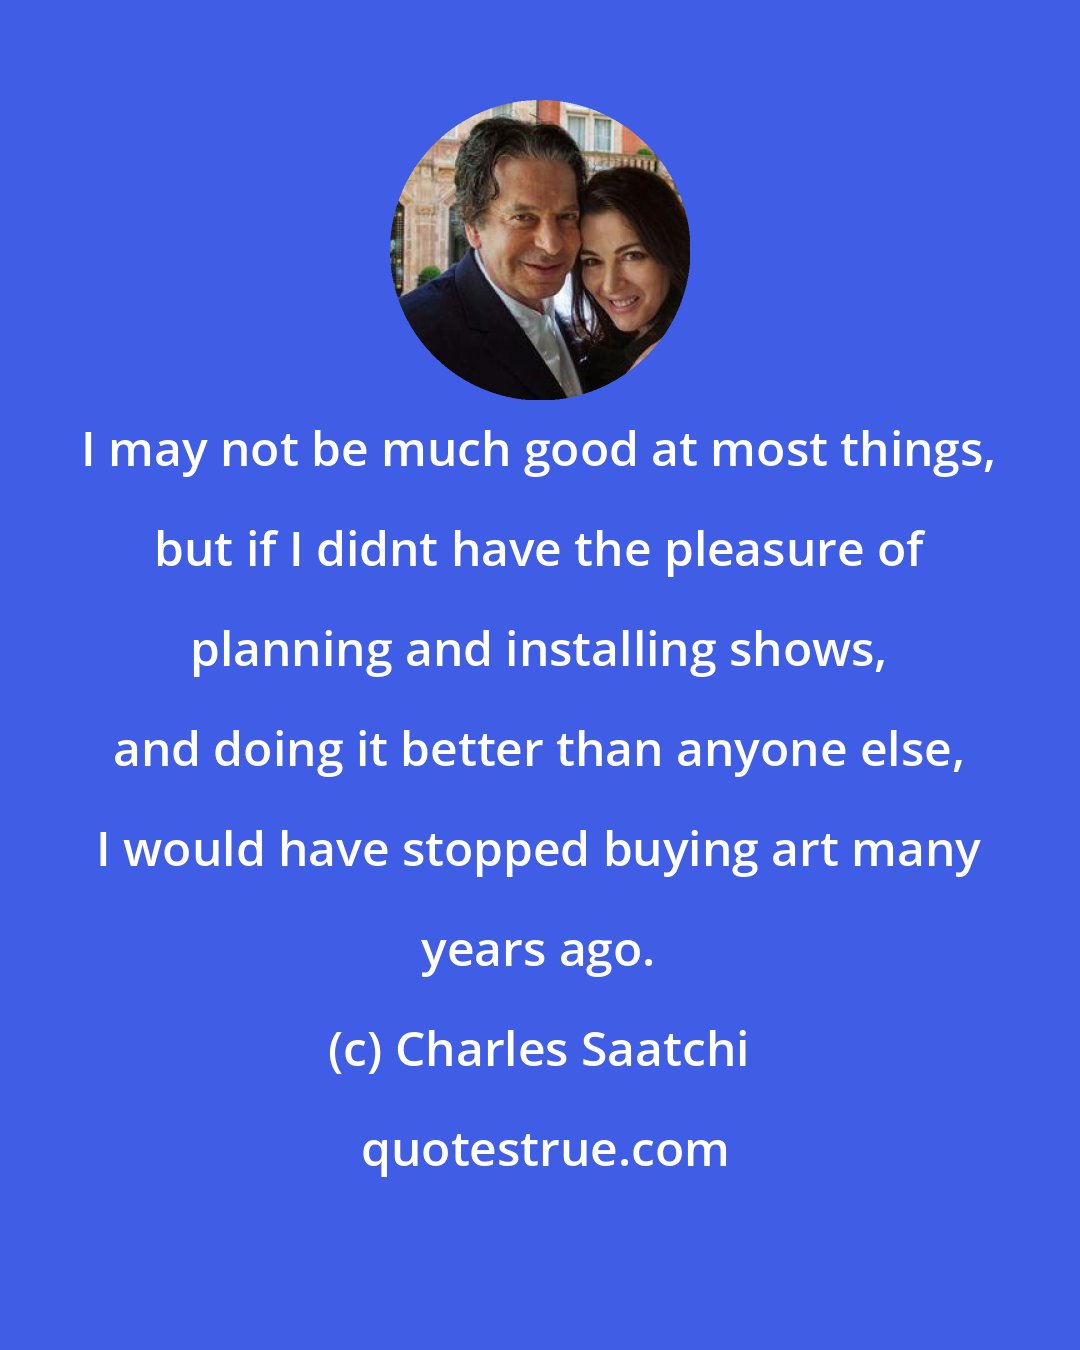 Charles Saatchi: I may not be much good at most things, but if I didnt have the pleasure of planning and installing shows, and doing it better than anyone else, I would have stopped buying art many years ago.